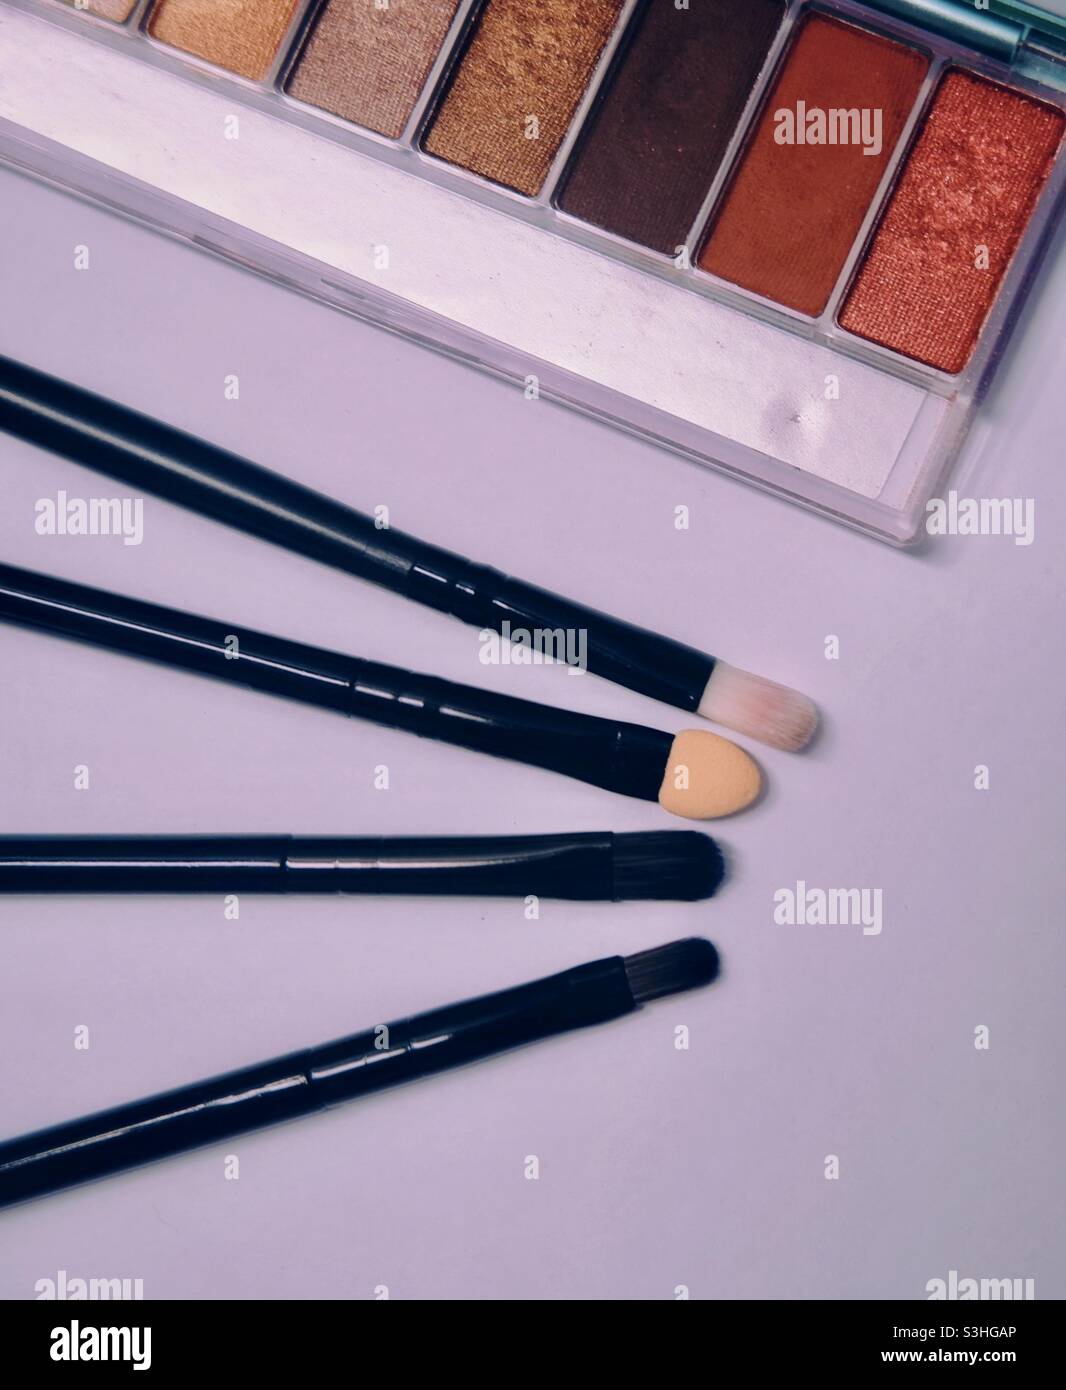 Four kind of brushes and eyeshadow palette in pink background Stock Photo